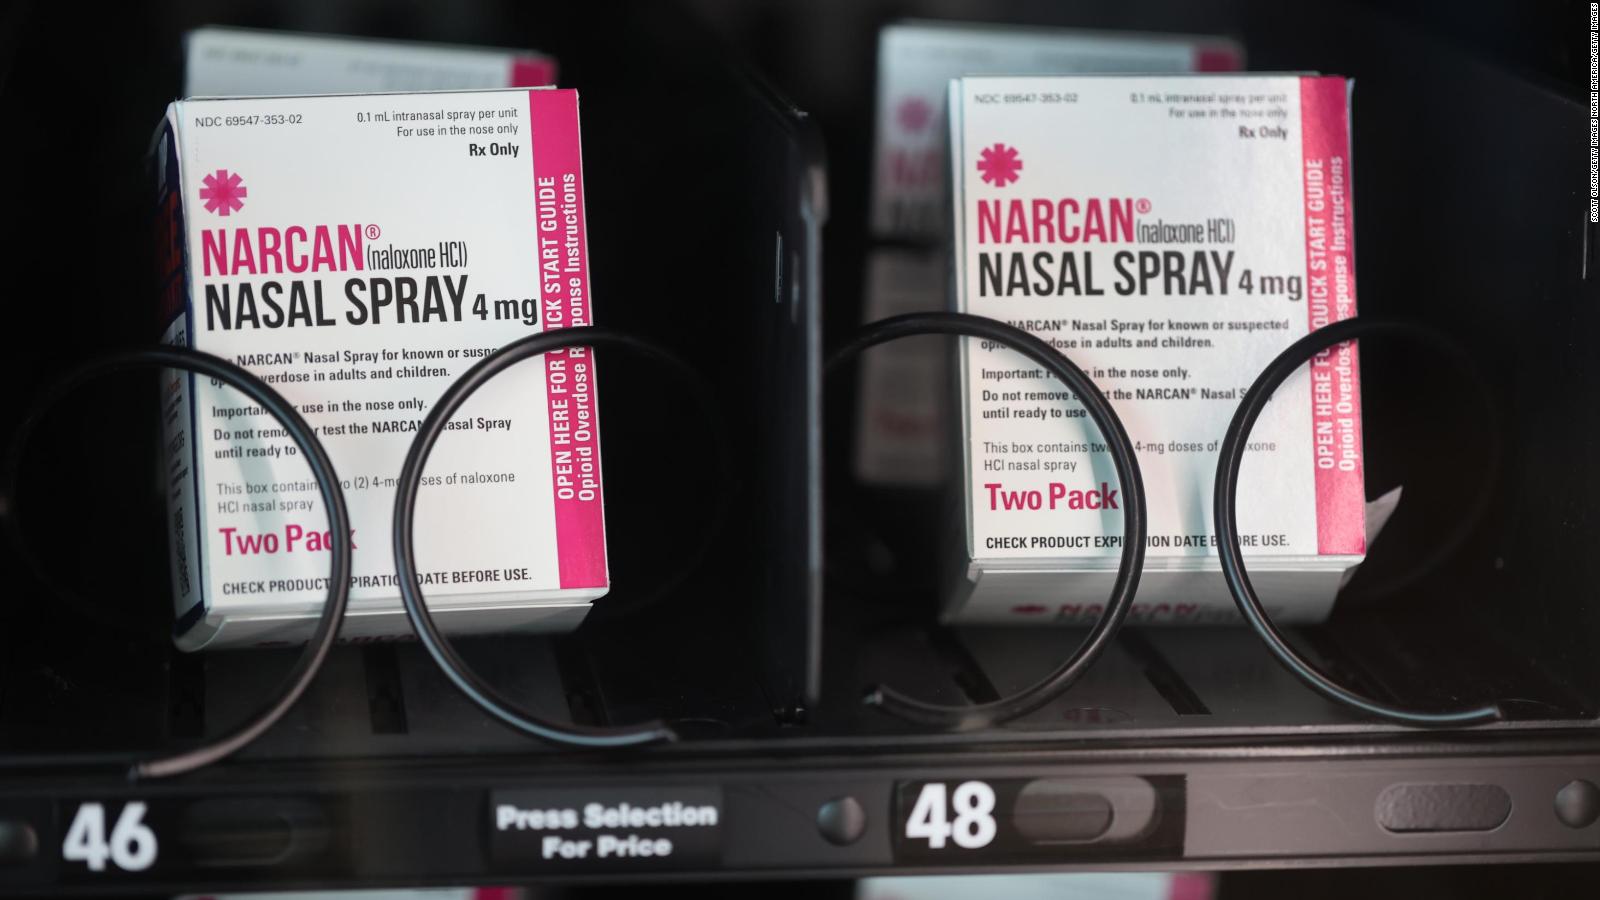 This spray could save thousands of lives from opioid overdose, and it can be bought without a prescription in the United States.